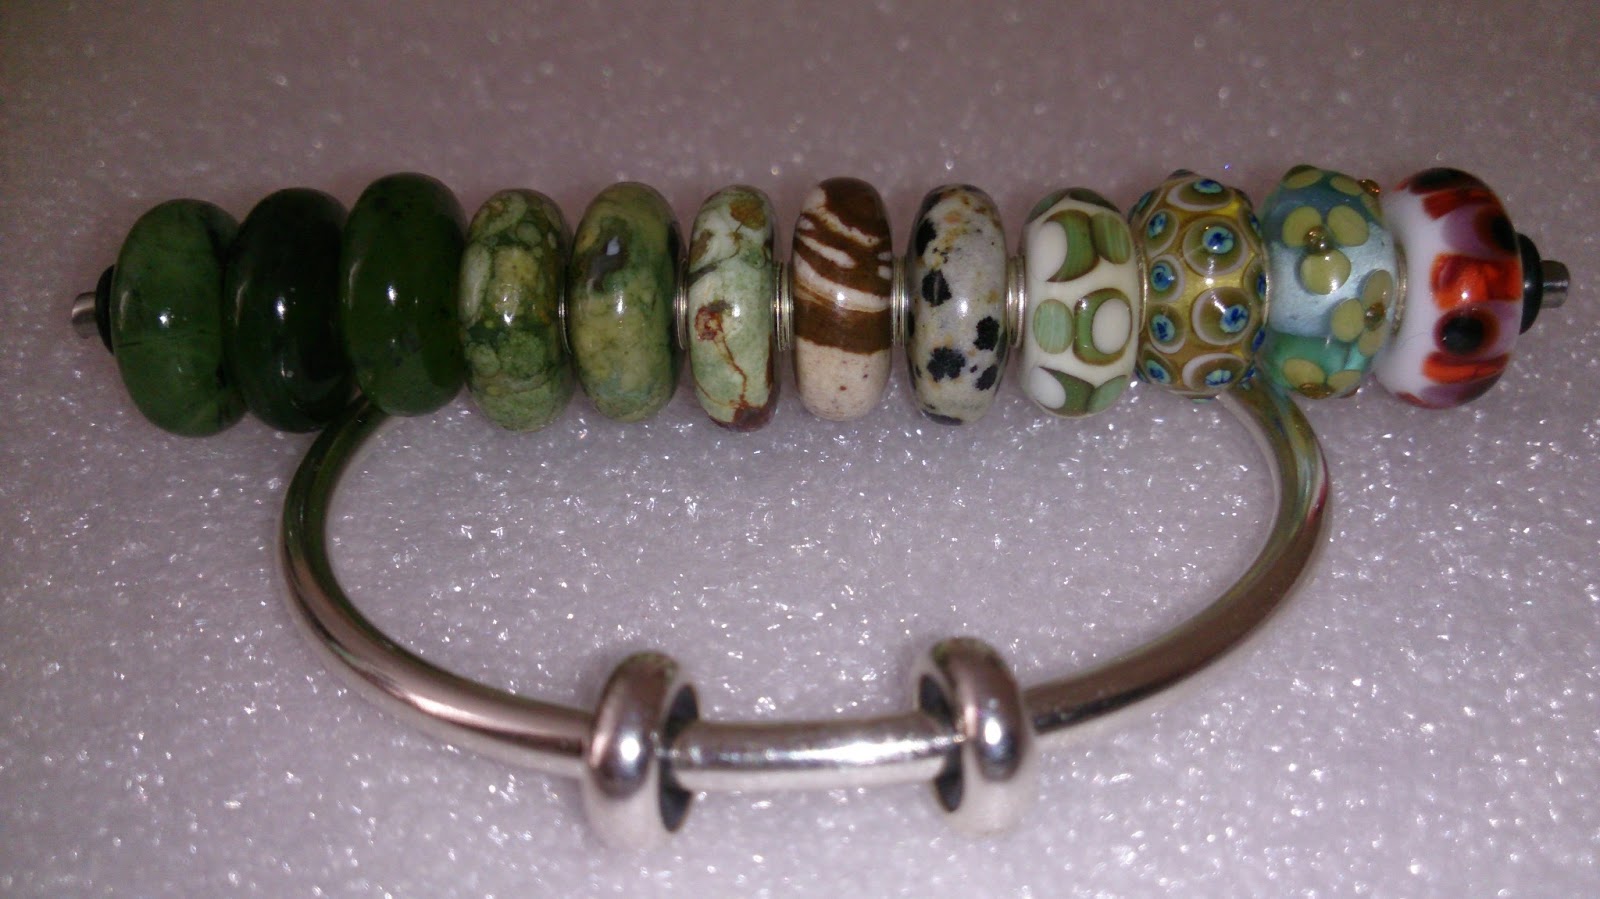 Curling Stones for Lego People: Trollbeads Bangle for the 